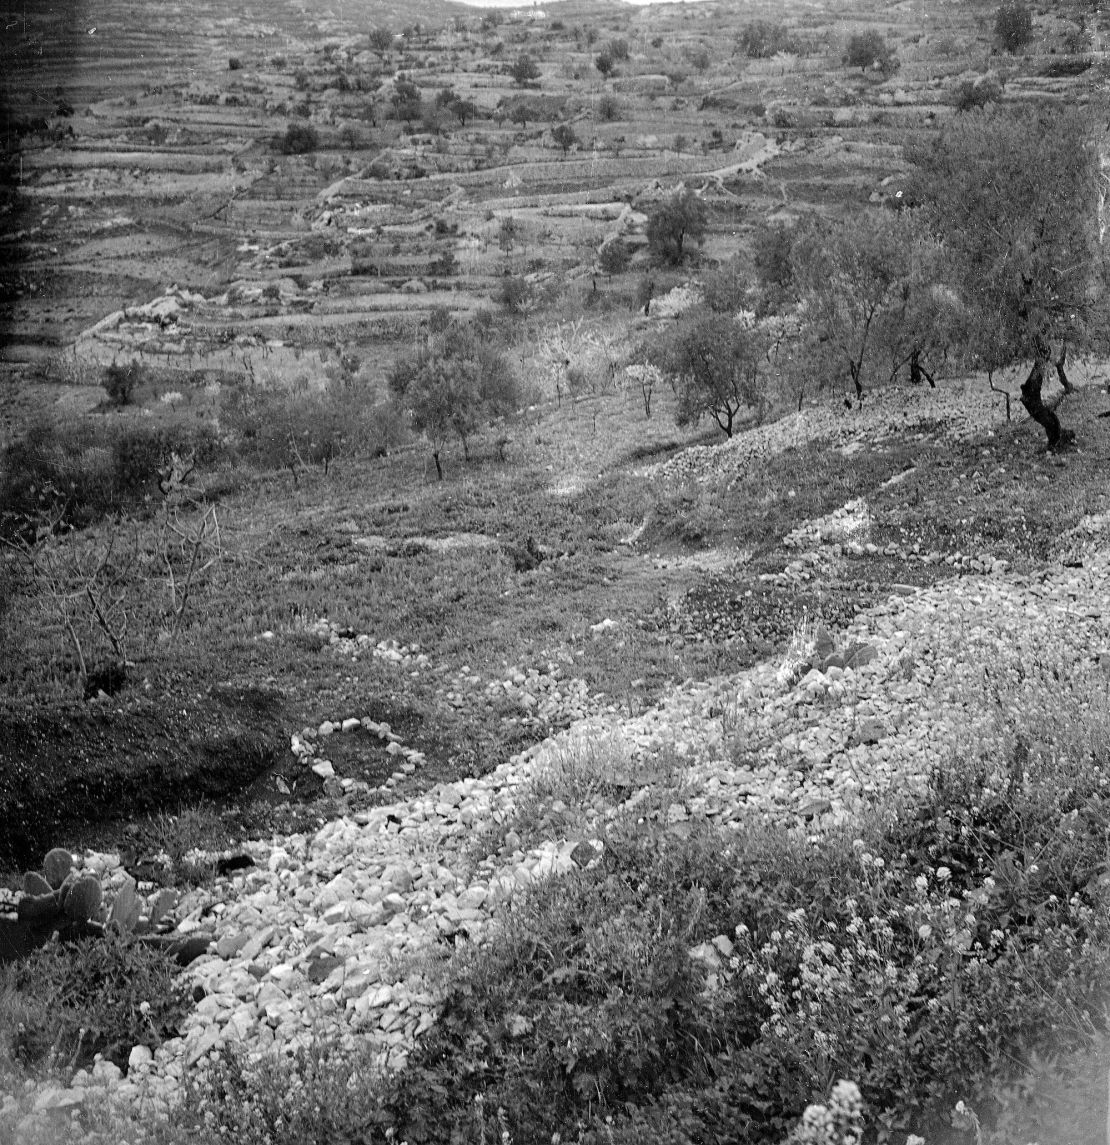 A mass grave where more than 100 victims of the Deir Yassin massacre were buried in April 1948. The round stone ring is a mass grave for women and the square one is for men.